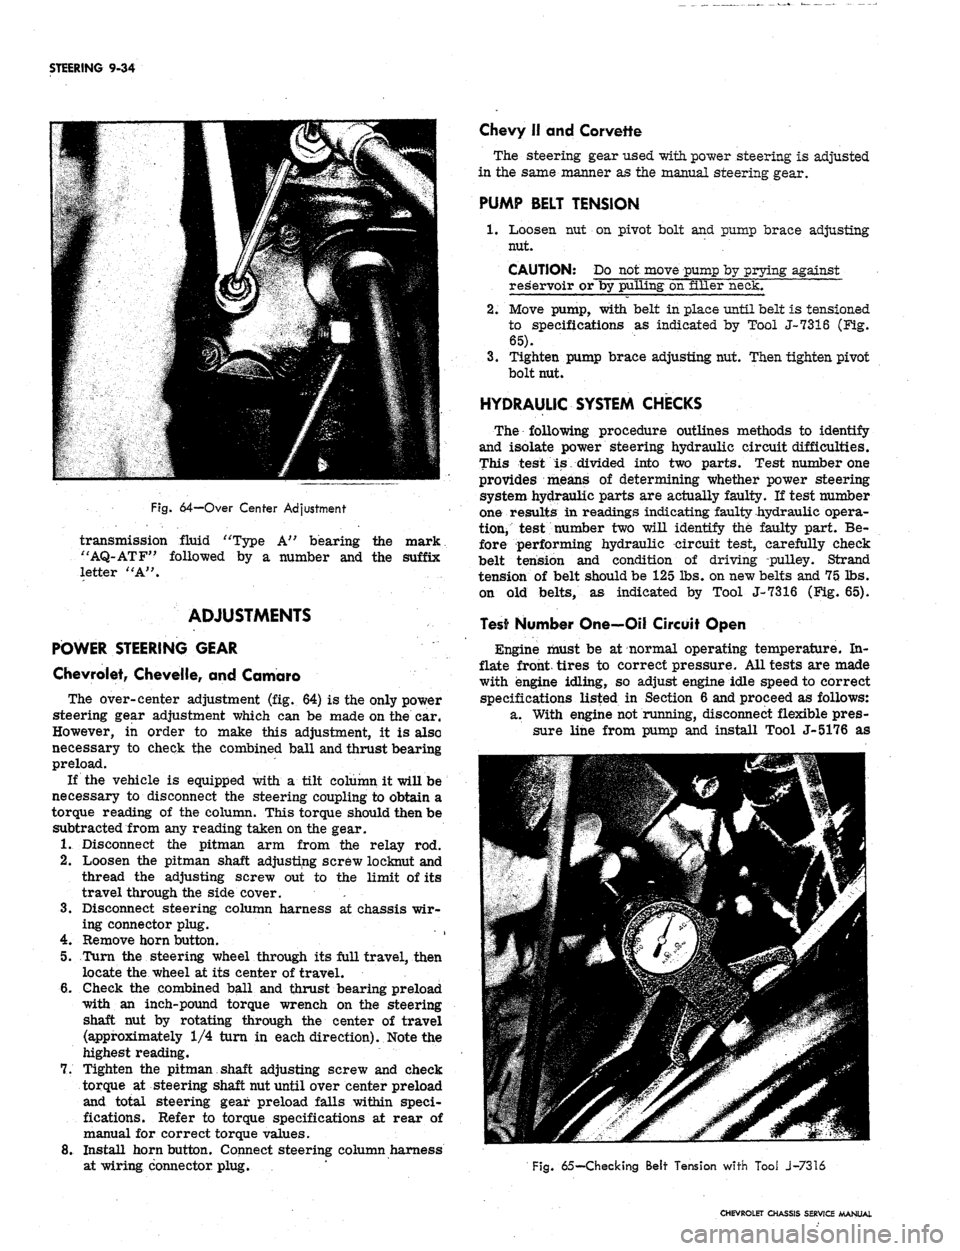 CHEVROLET CAMARO 1967 1.G Chassis Workshop Manual 
STEERING 9-34

Fig.
 64-Over Center Adjustment

transmission fluid "Type A" bearing the mark

"AQ-ATF" followed by a number and the suffix

letter "A".

ADJUSTMENTS

POWER STEERING GEAR

Chevrolet, C